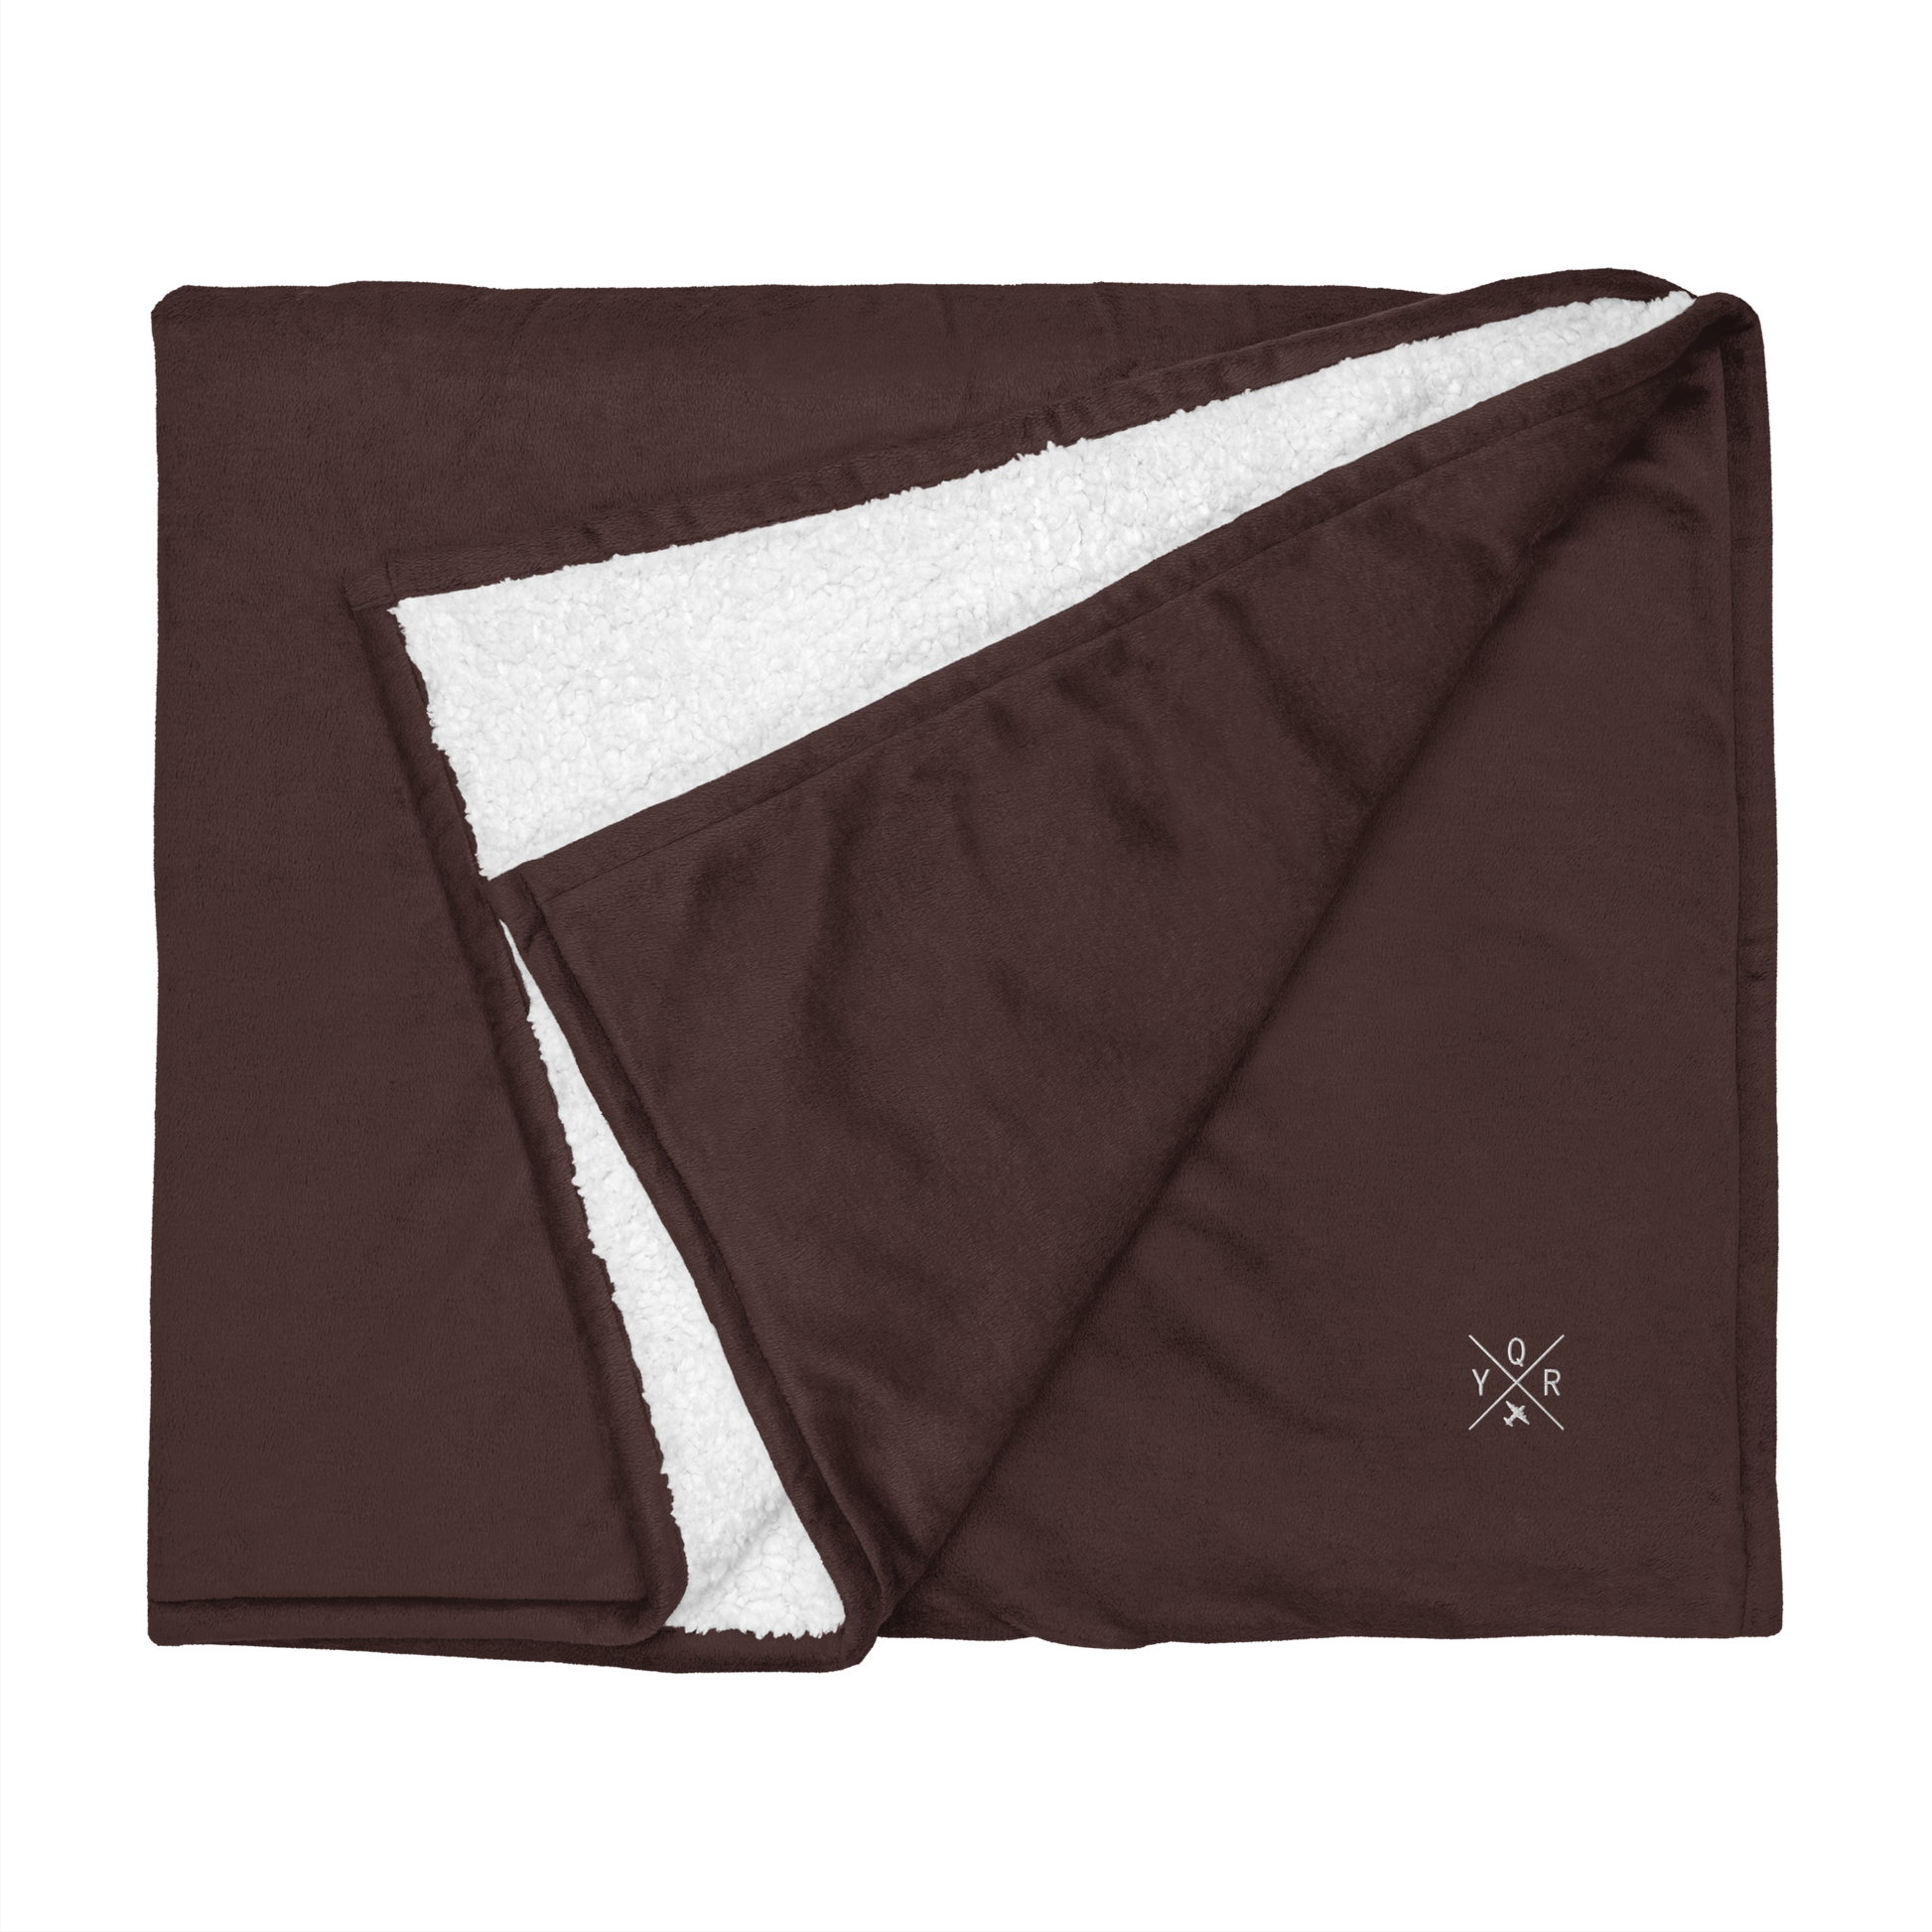 YHM Designs - YQR Regina Premium Sherpa Blanket - Crossed-X Design with Airport Code and Vintage Propliner - White Embroidery - Image 08